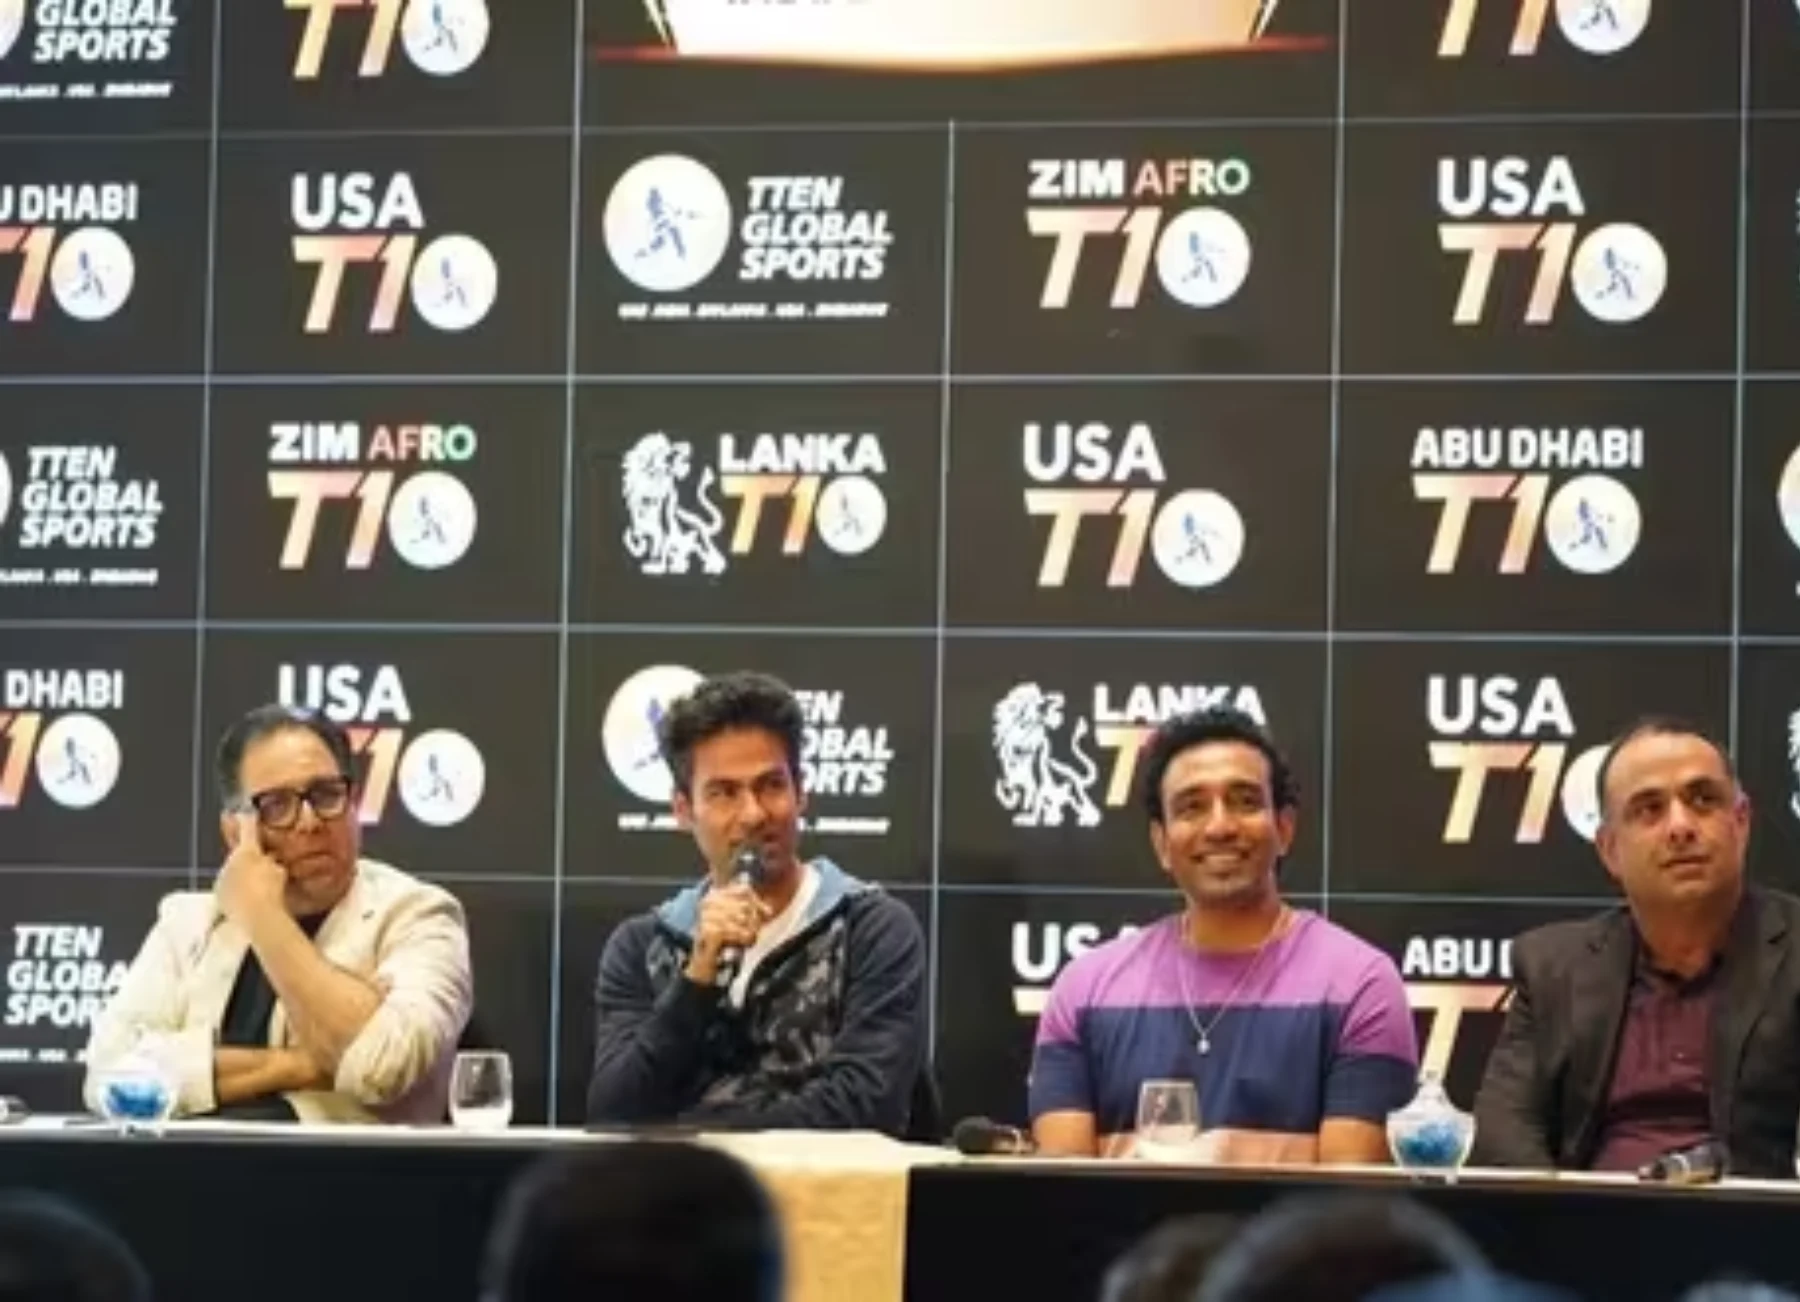 T Ten Global Sports announces Indian Masters T10, set to take place in June 2023